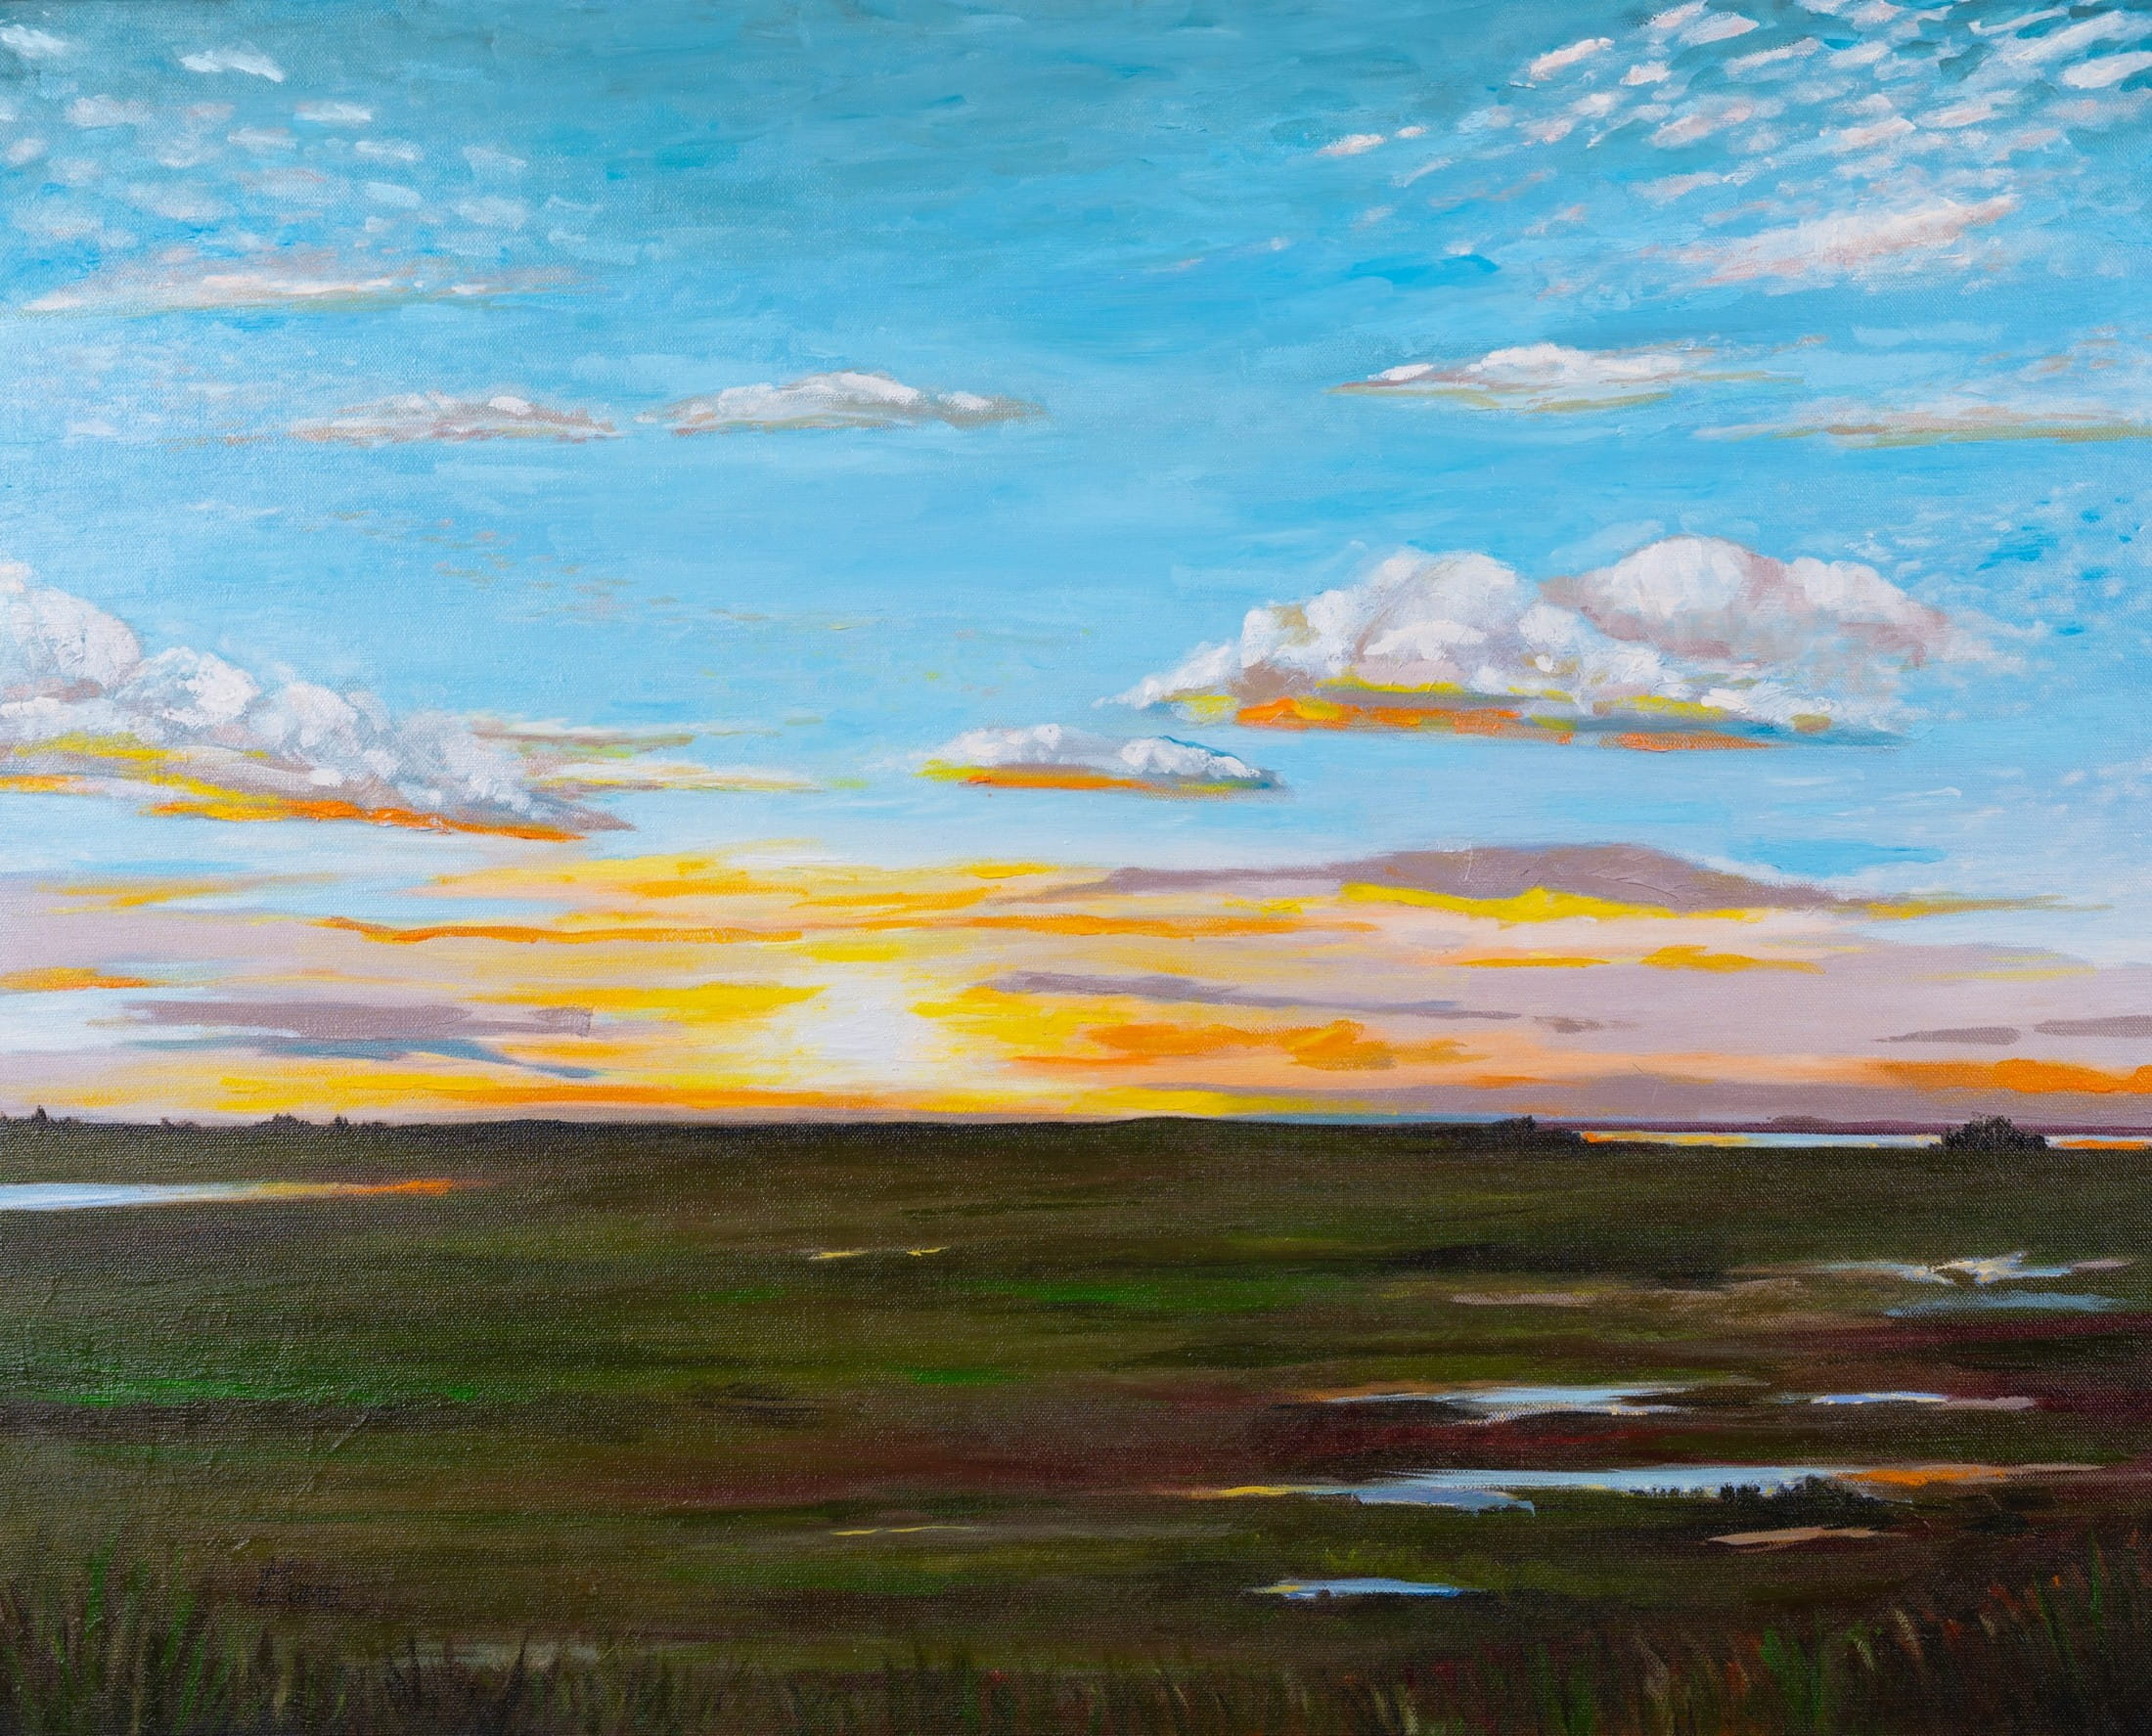 Sunset landscape painting by Heather Lumb.